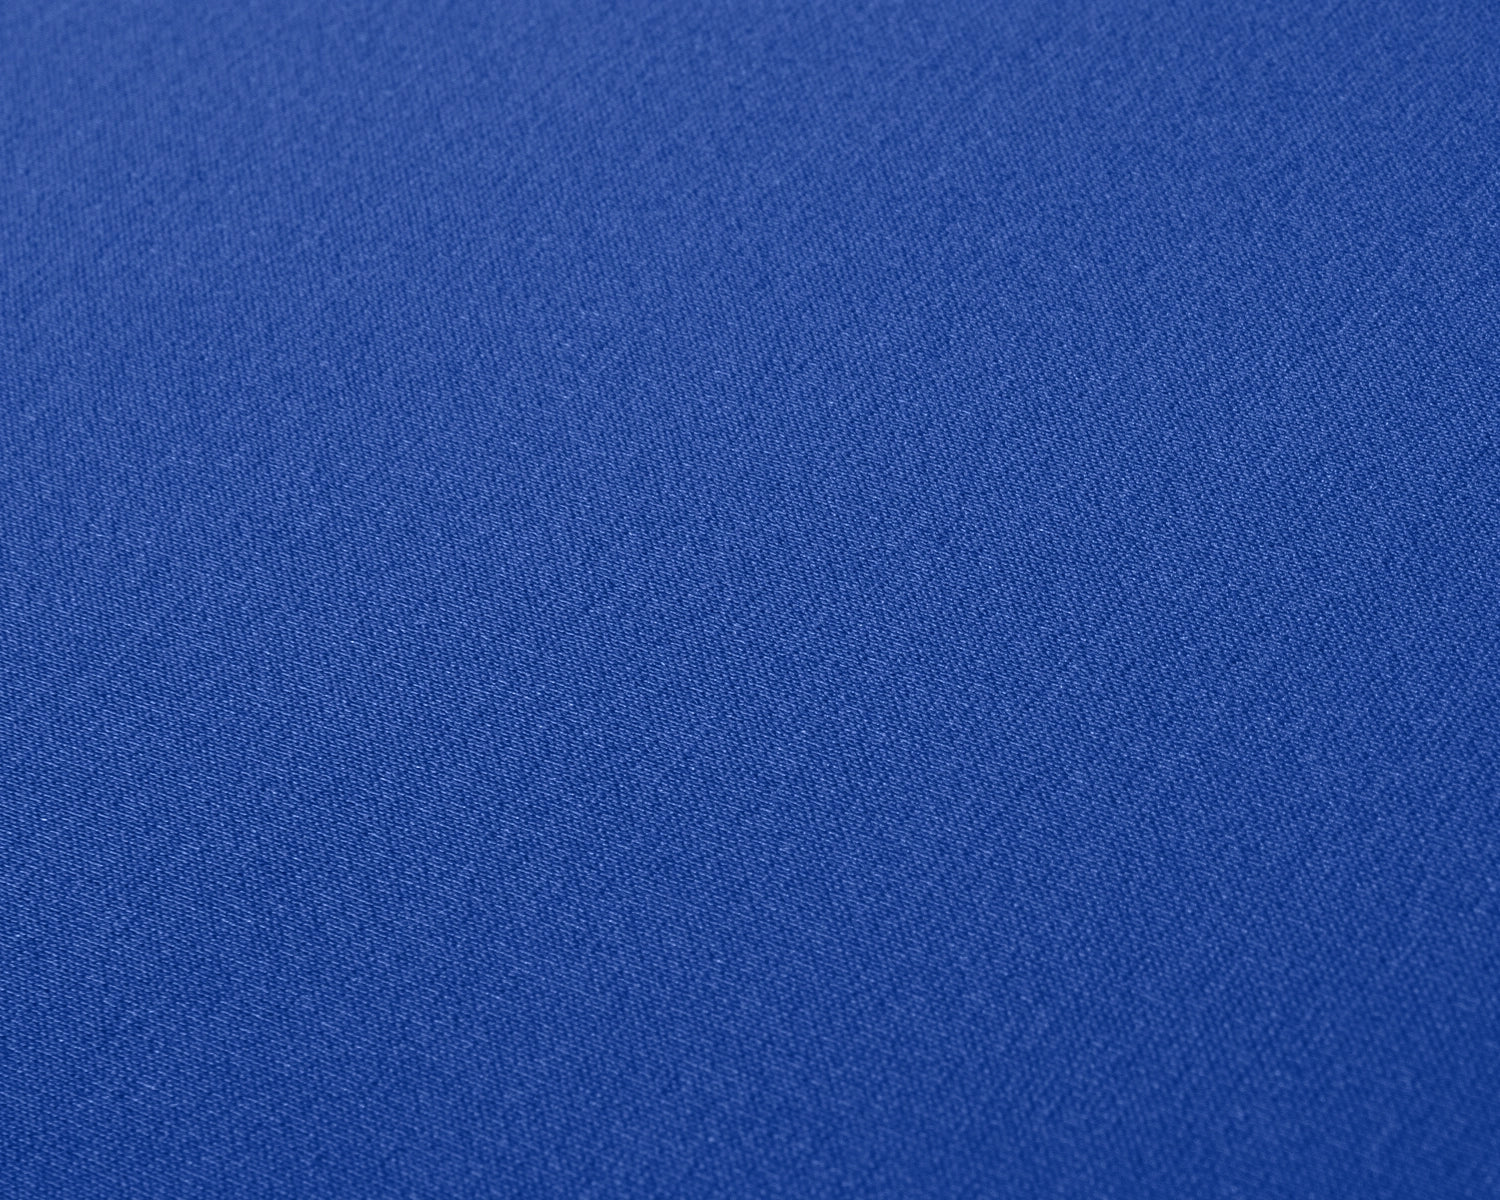 Detail image of soft stretchy fabric.